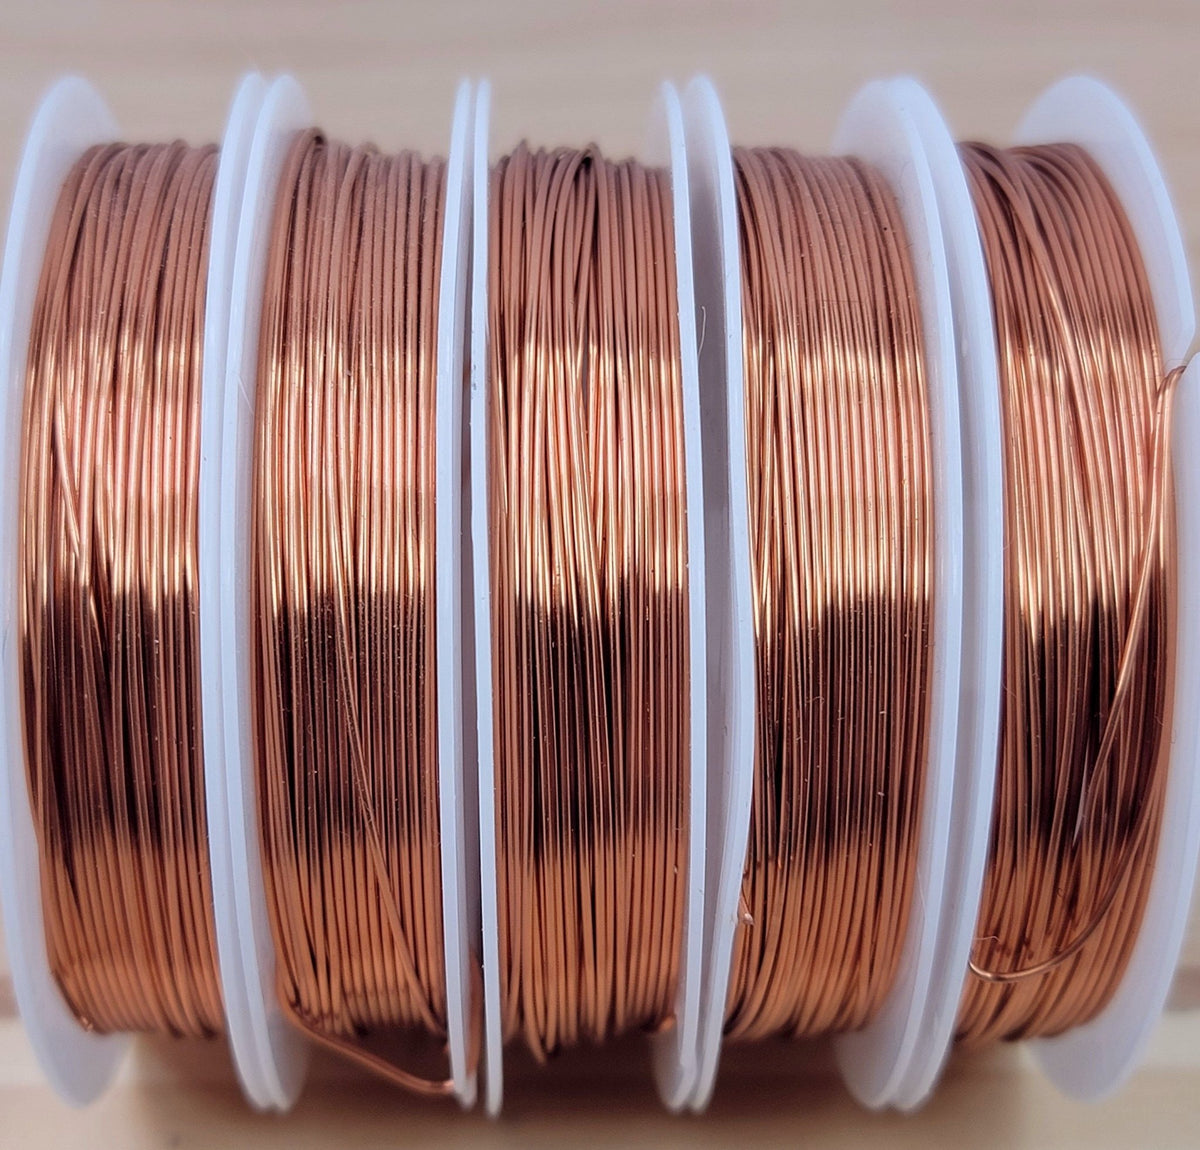 Copper 22 Gauge (0.60mm) Jewelry Wire - 25 Foot Spool (WIRE01) freeshipping  - Beads and Babble